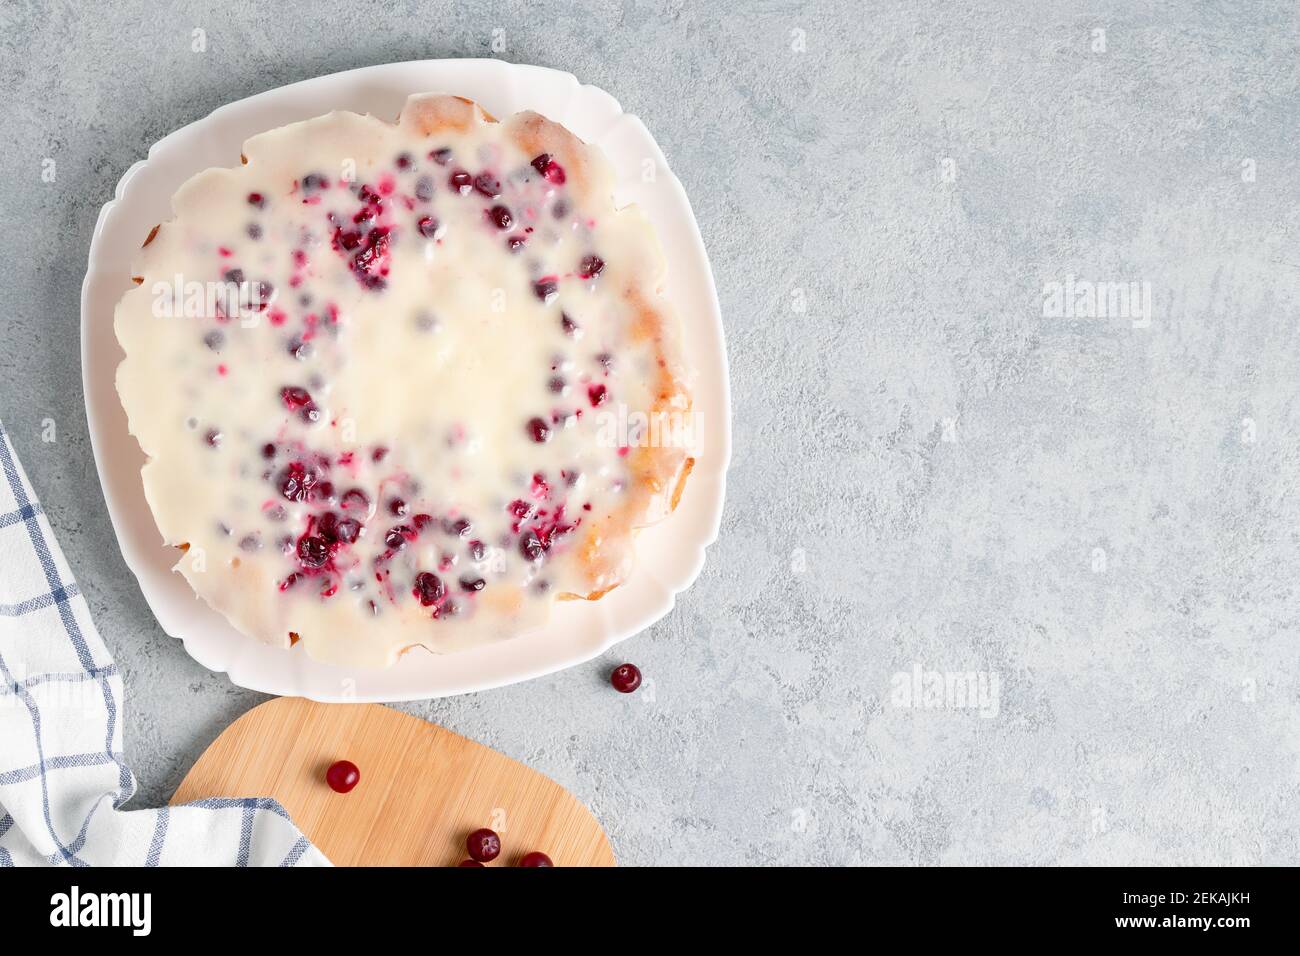 Homemade cranberry and sour cream pie in a glass baking dish. Top view, copy space Stock Photo